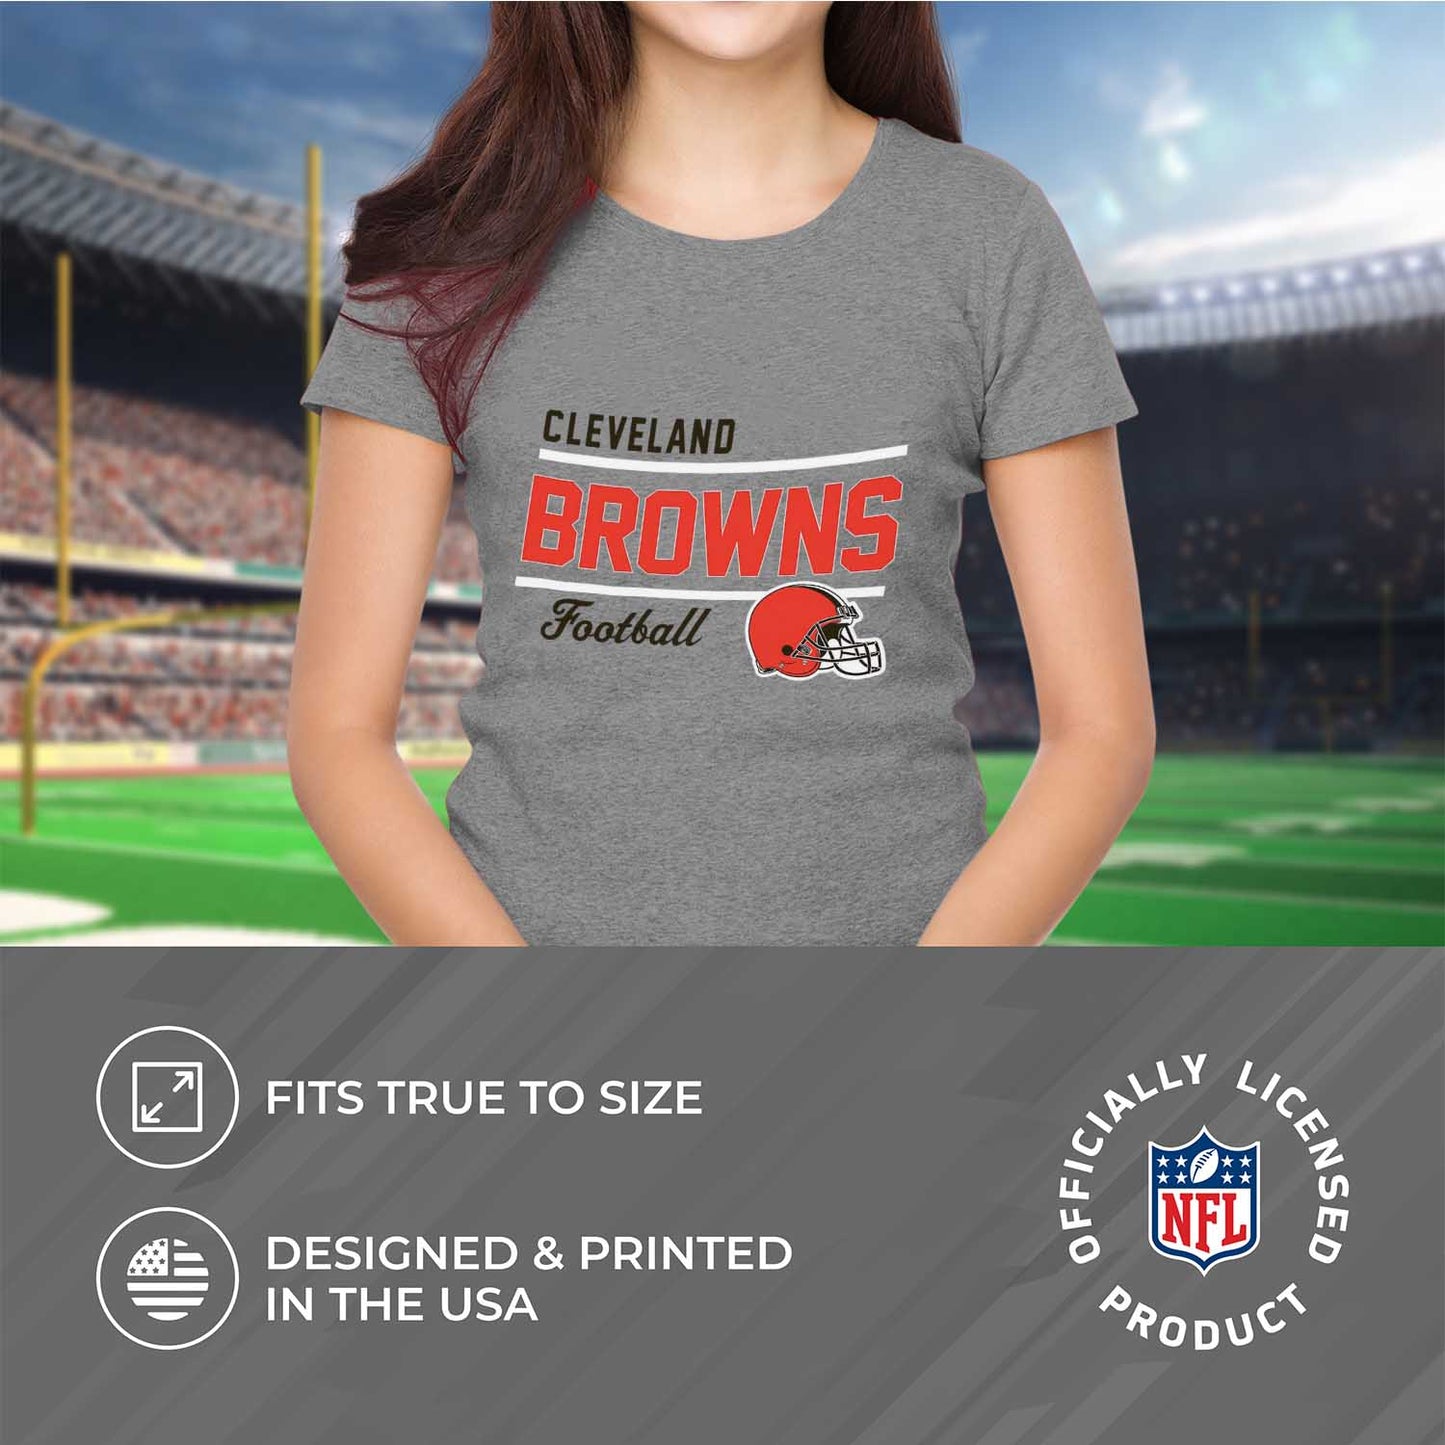 Cleveland Browns NFL Gameday Women's Relaxed Fit T-shirt - Sport Gray